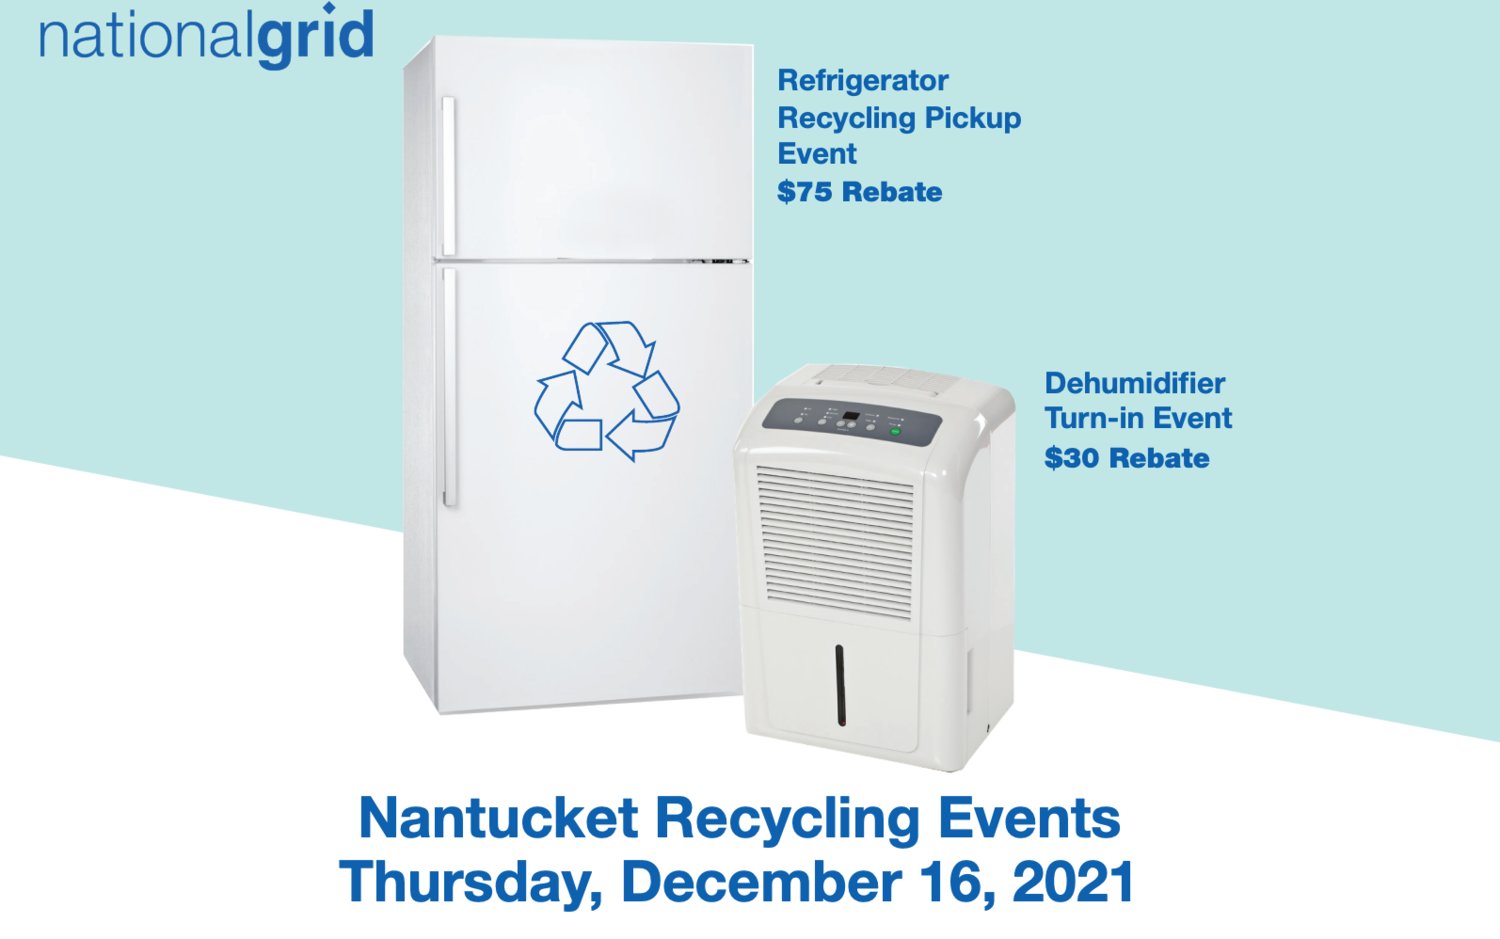 Refrigerators, freezers and dehumidifiers may be recycled Thursday, Dec. 16.